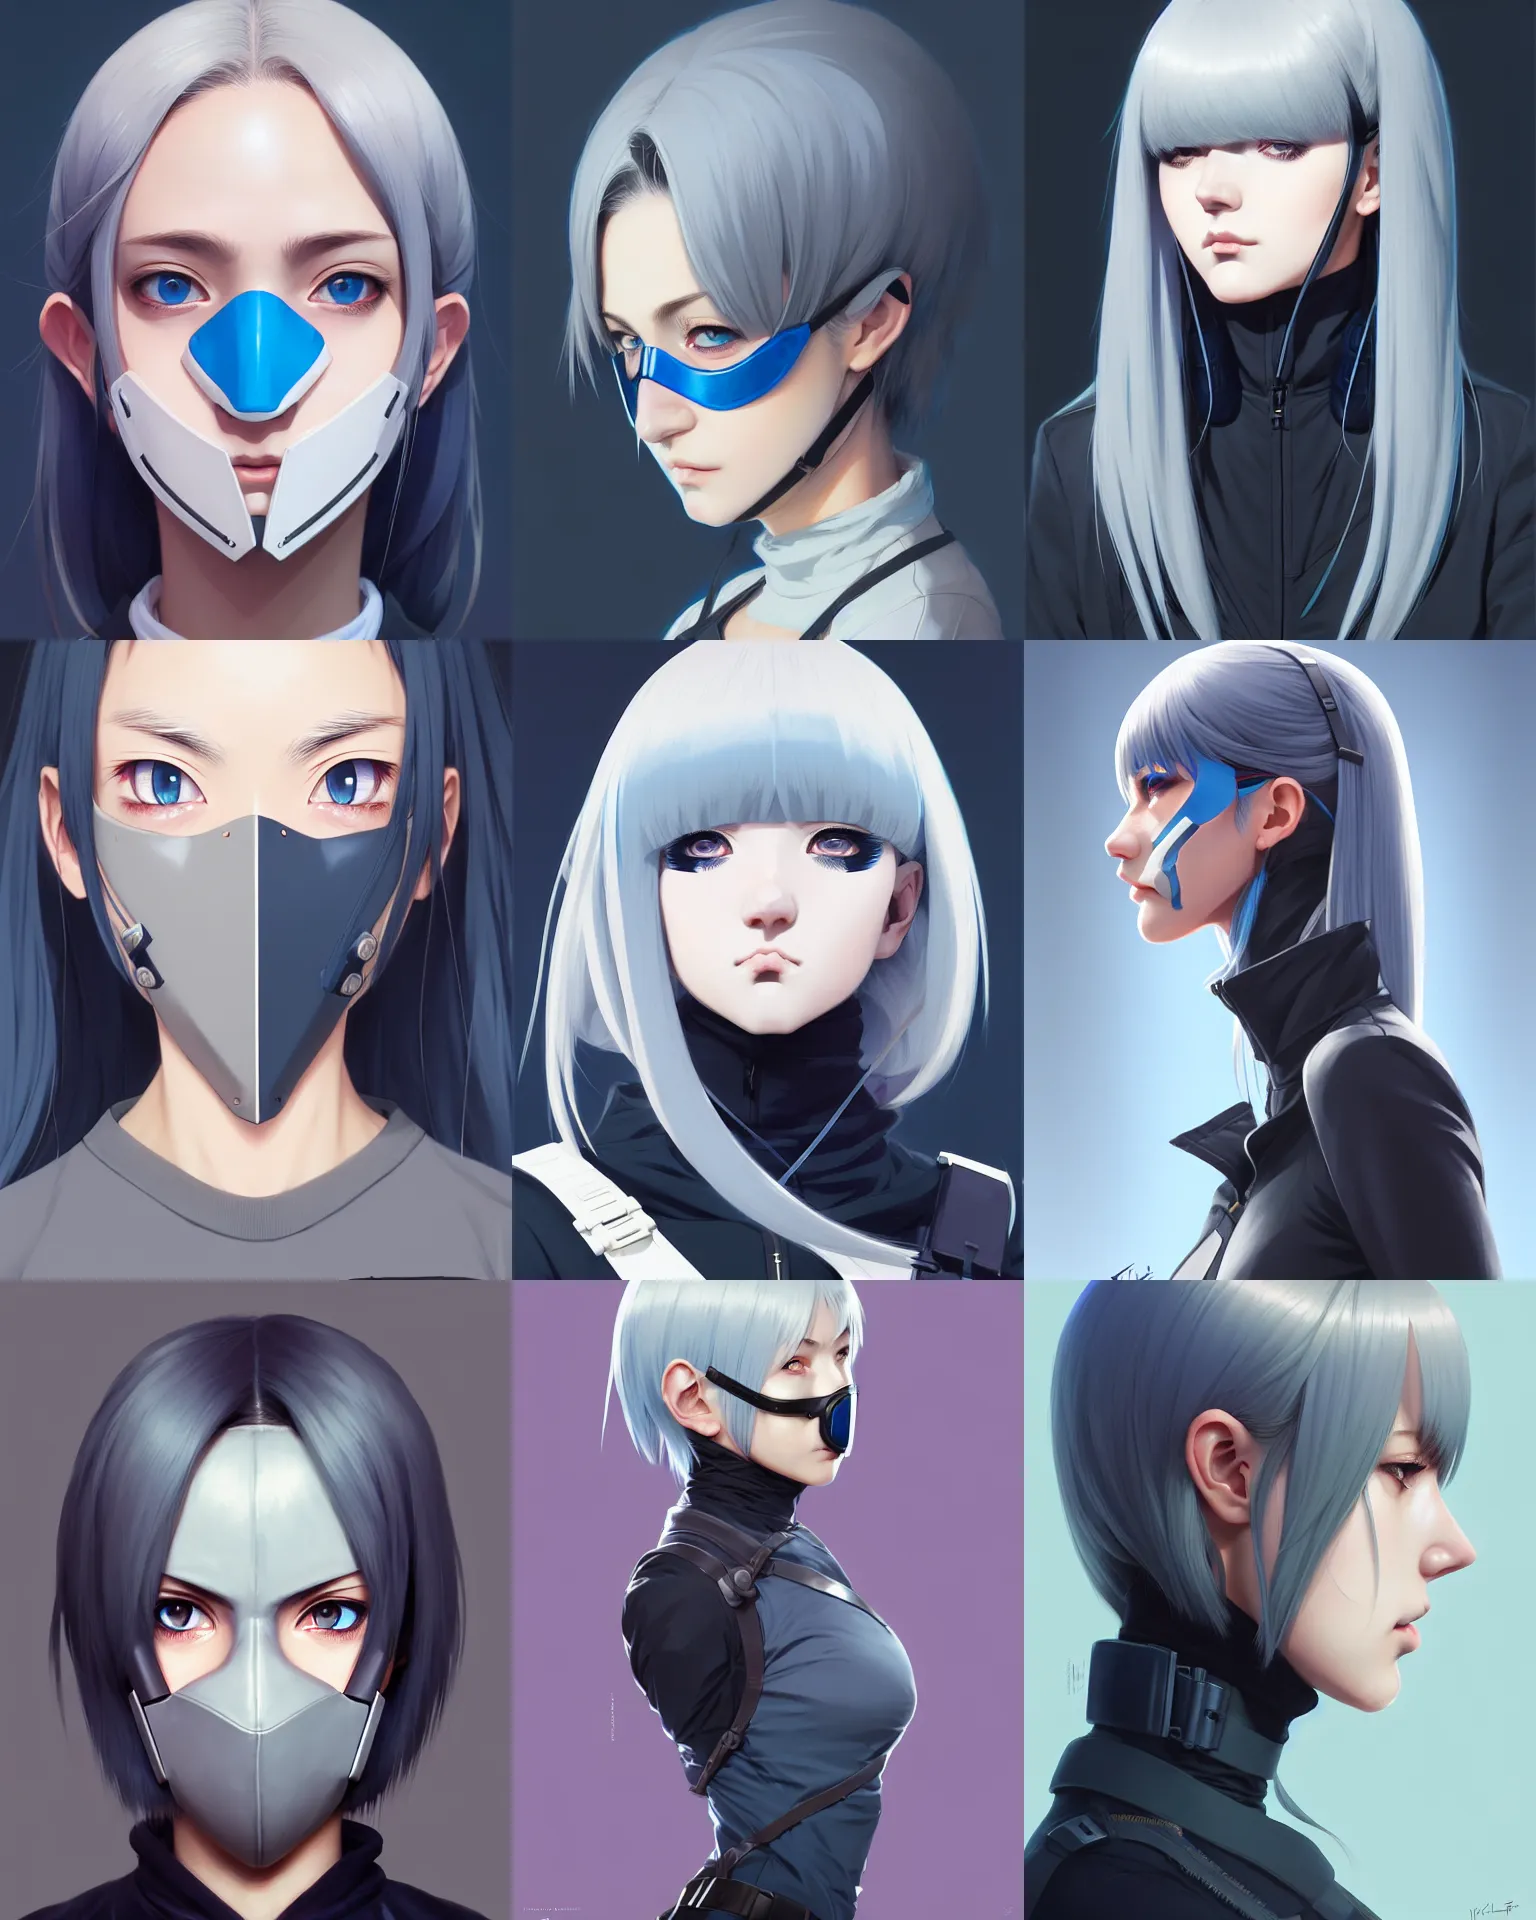 ArtStation - people as video game/anime characters #3